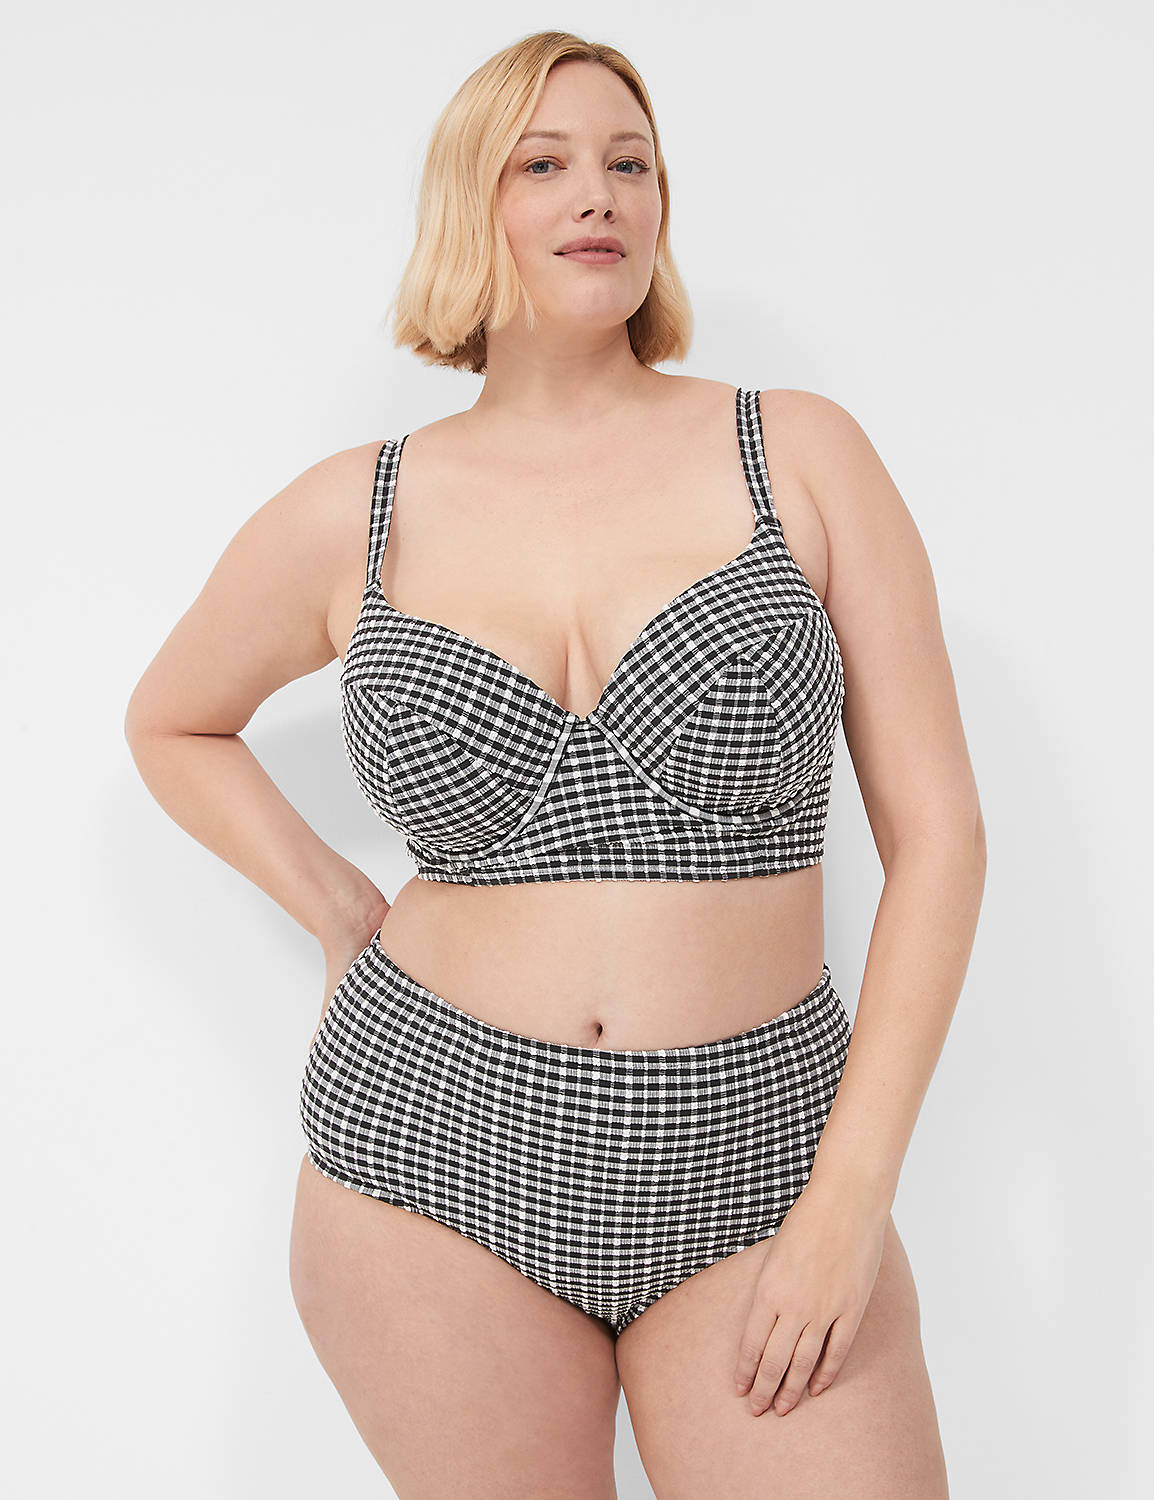 Gingham Brief 1138788 Product Image 1